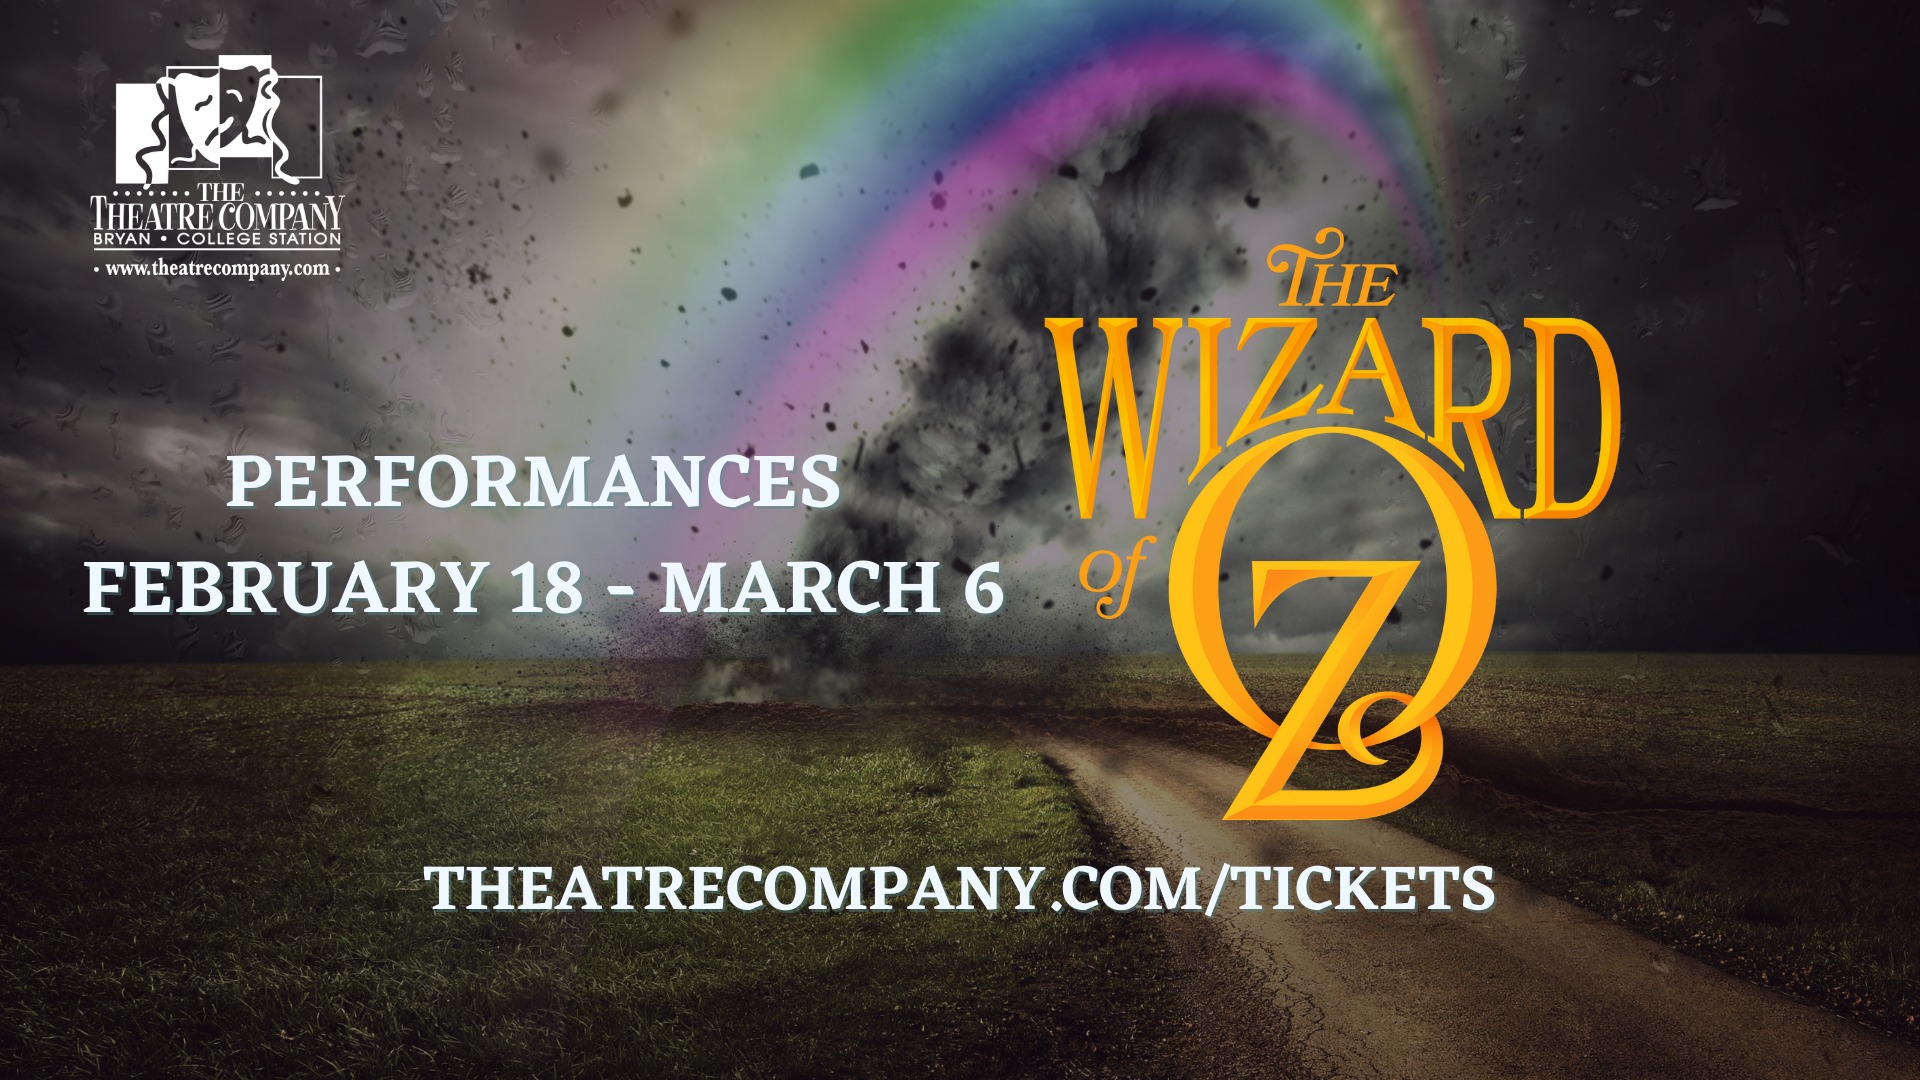 The Wizard of Oz by The Theatre Company